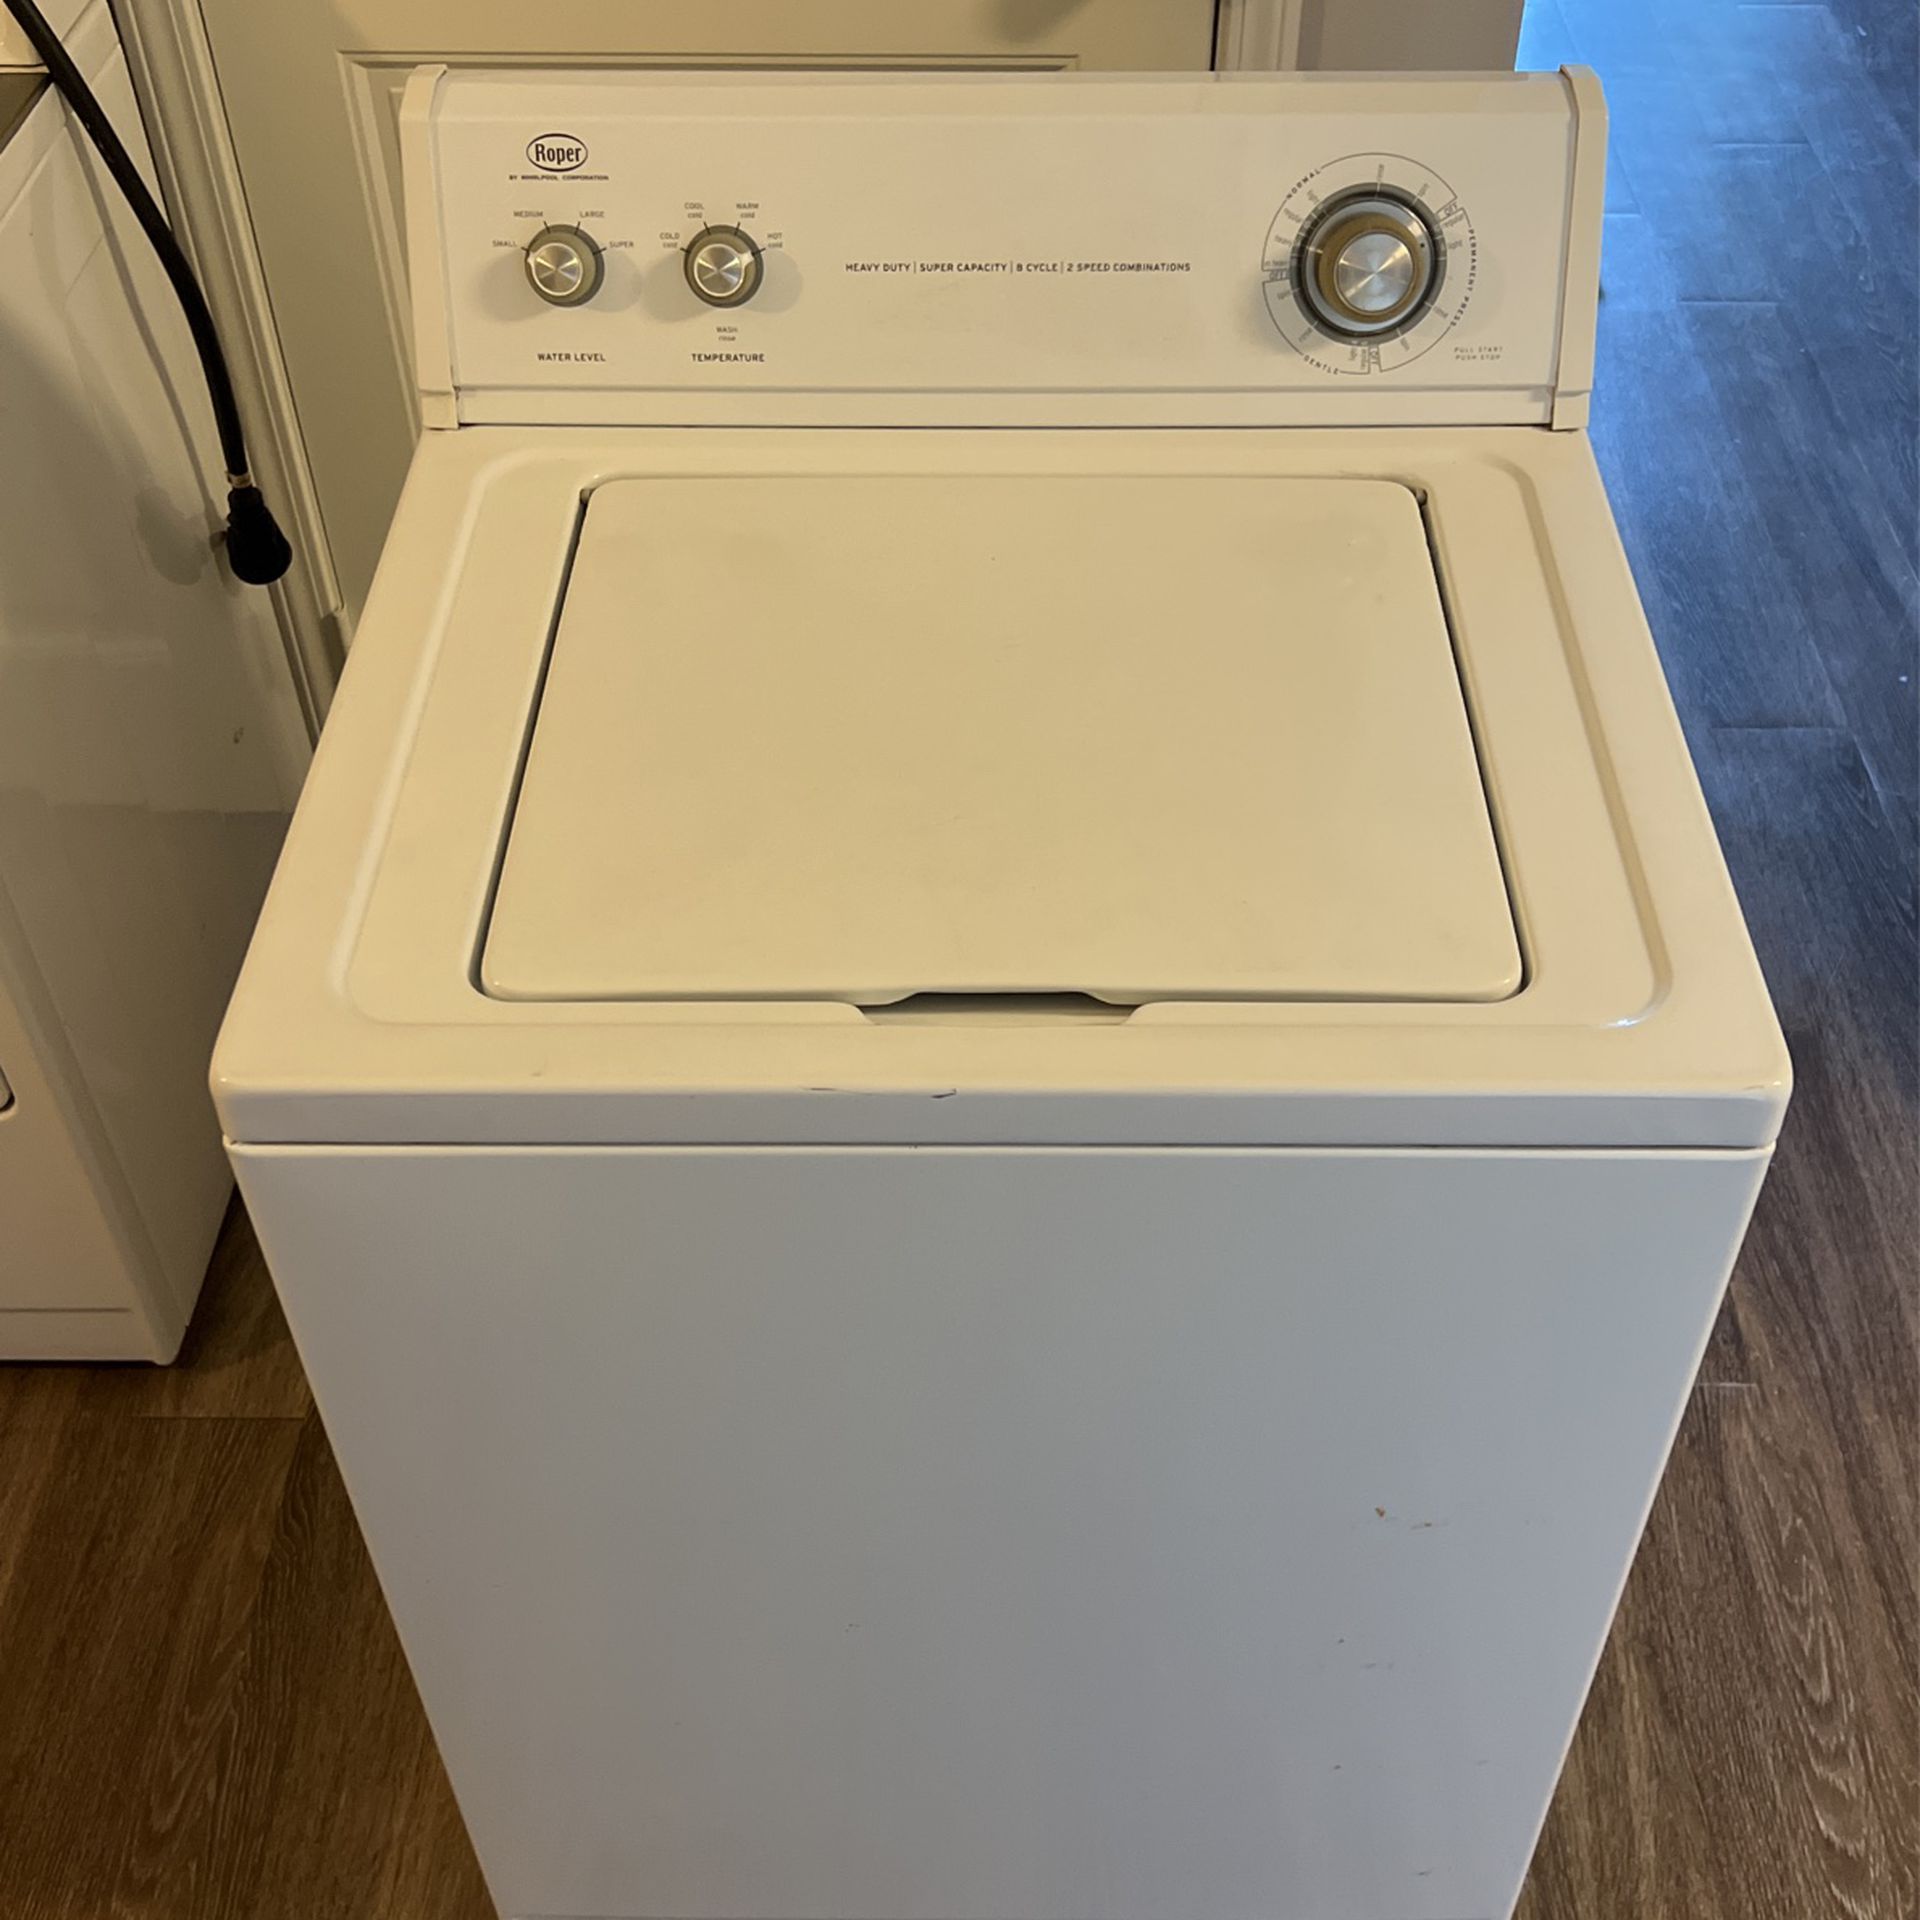 Roper By Whirlpool Washer 